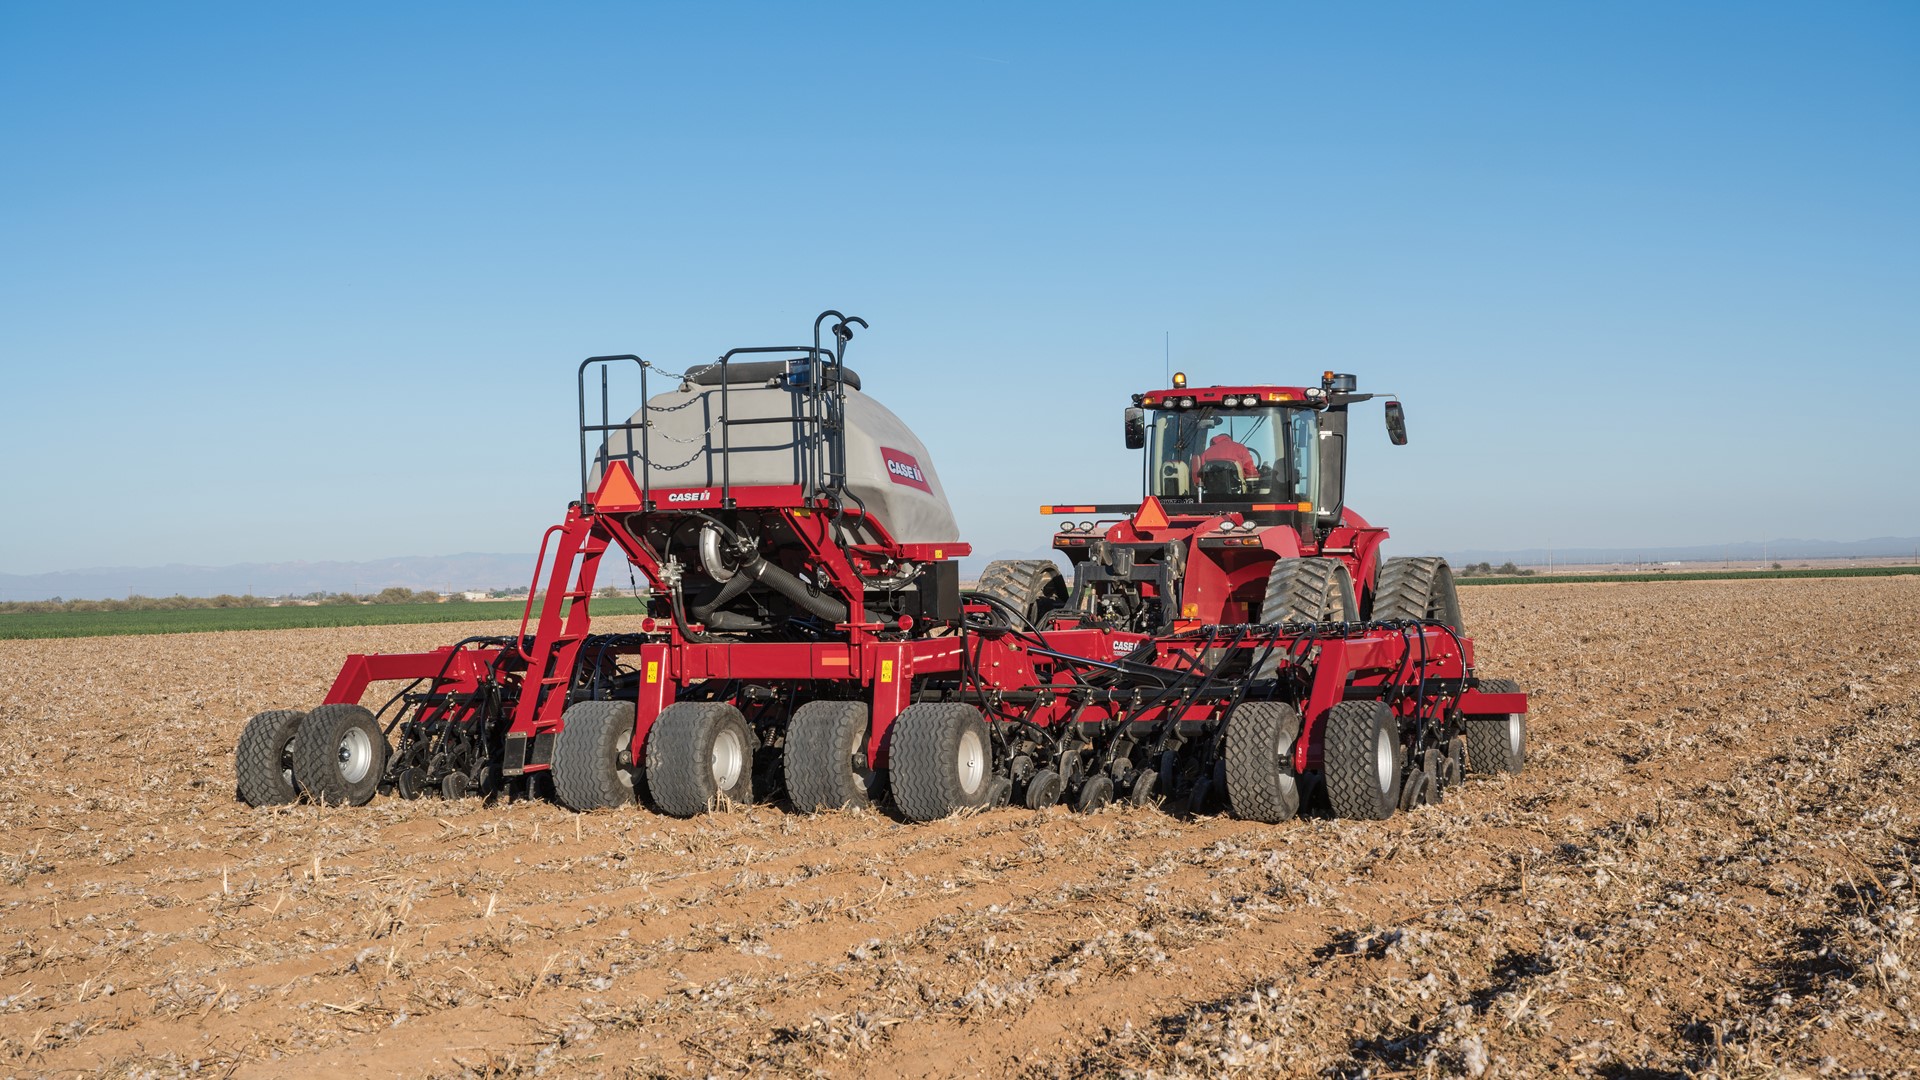 The new Precision Disk 550 series air drill offers added capacity and an agronomically designed row unit.